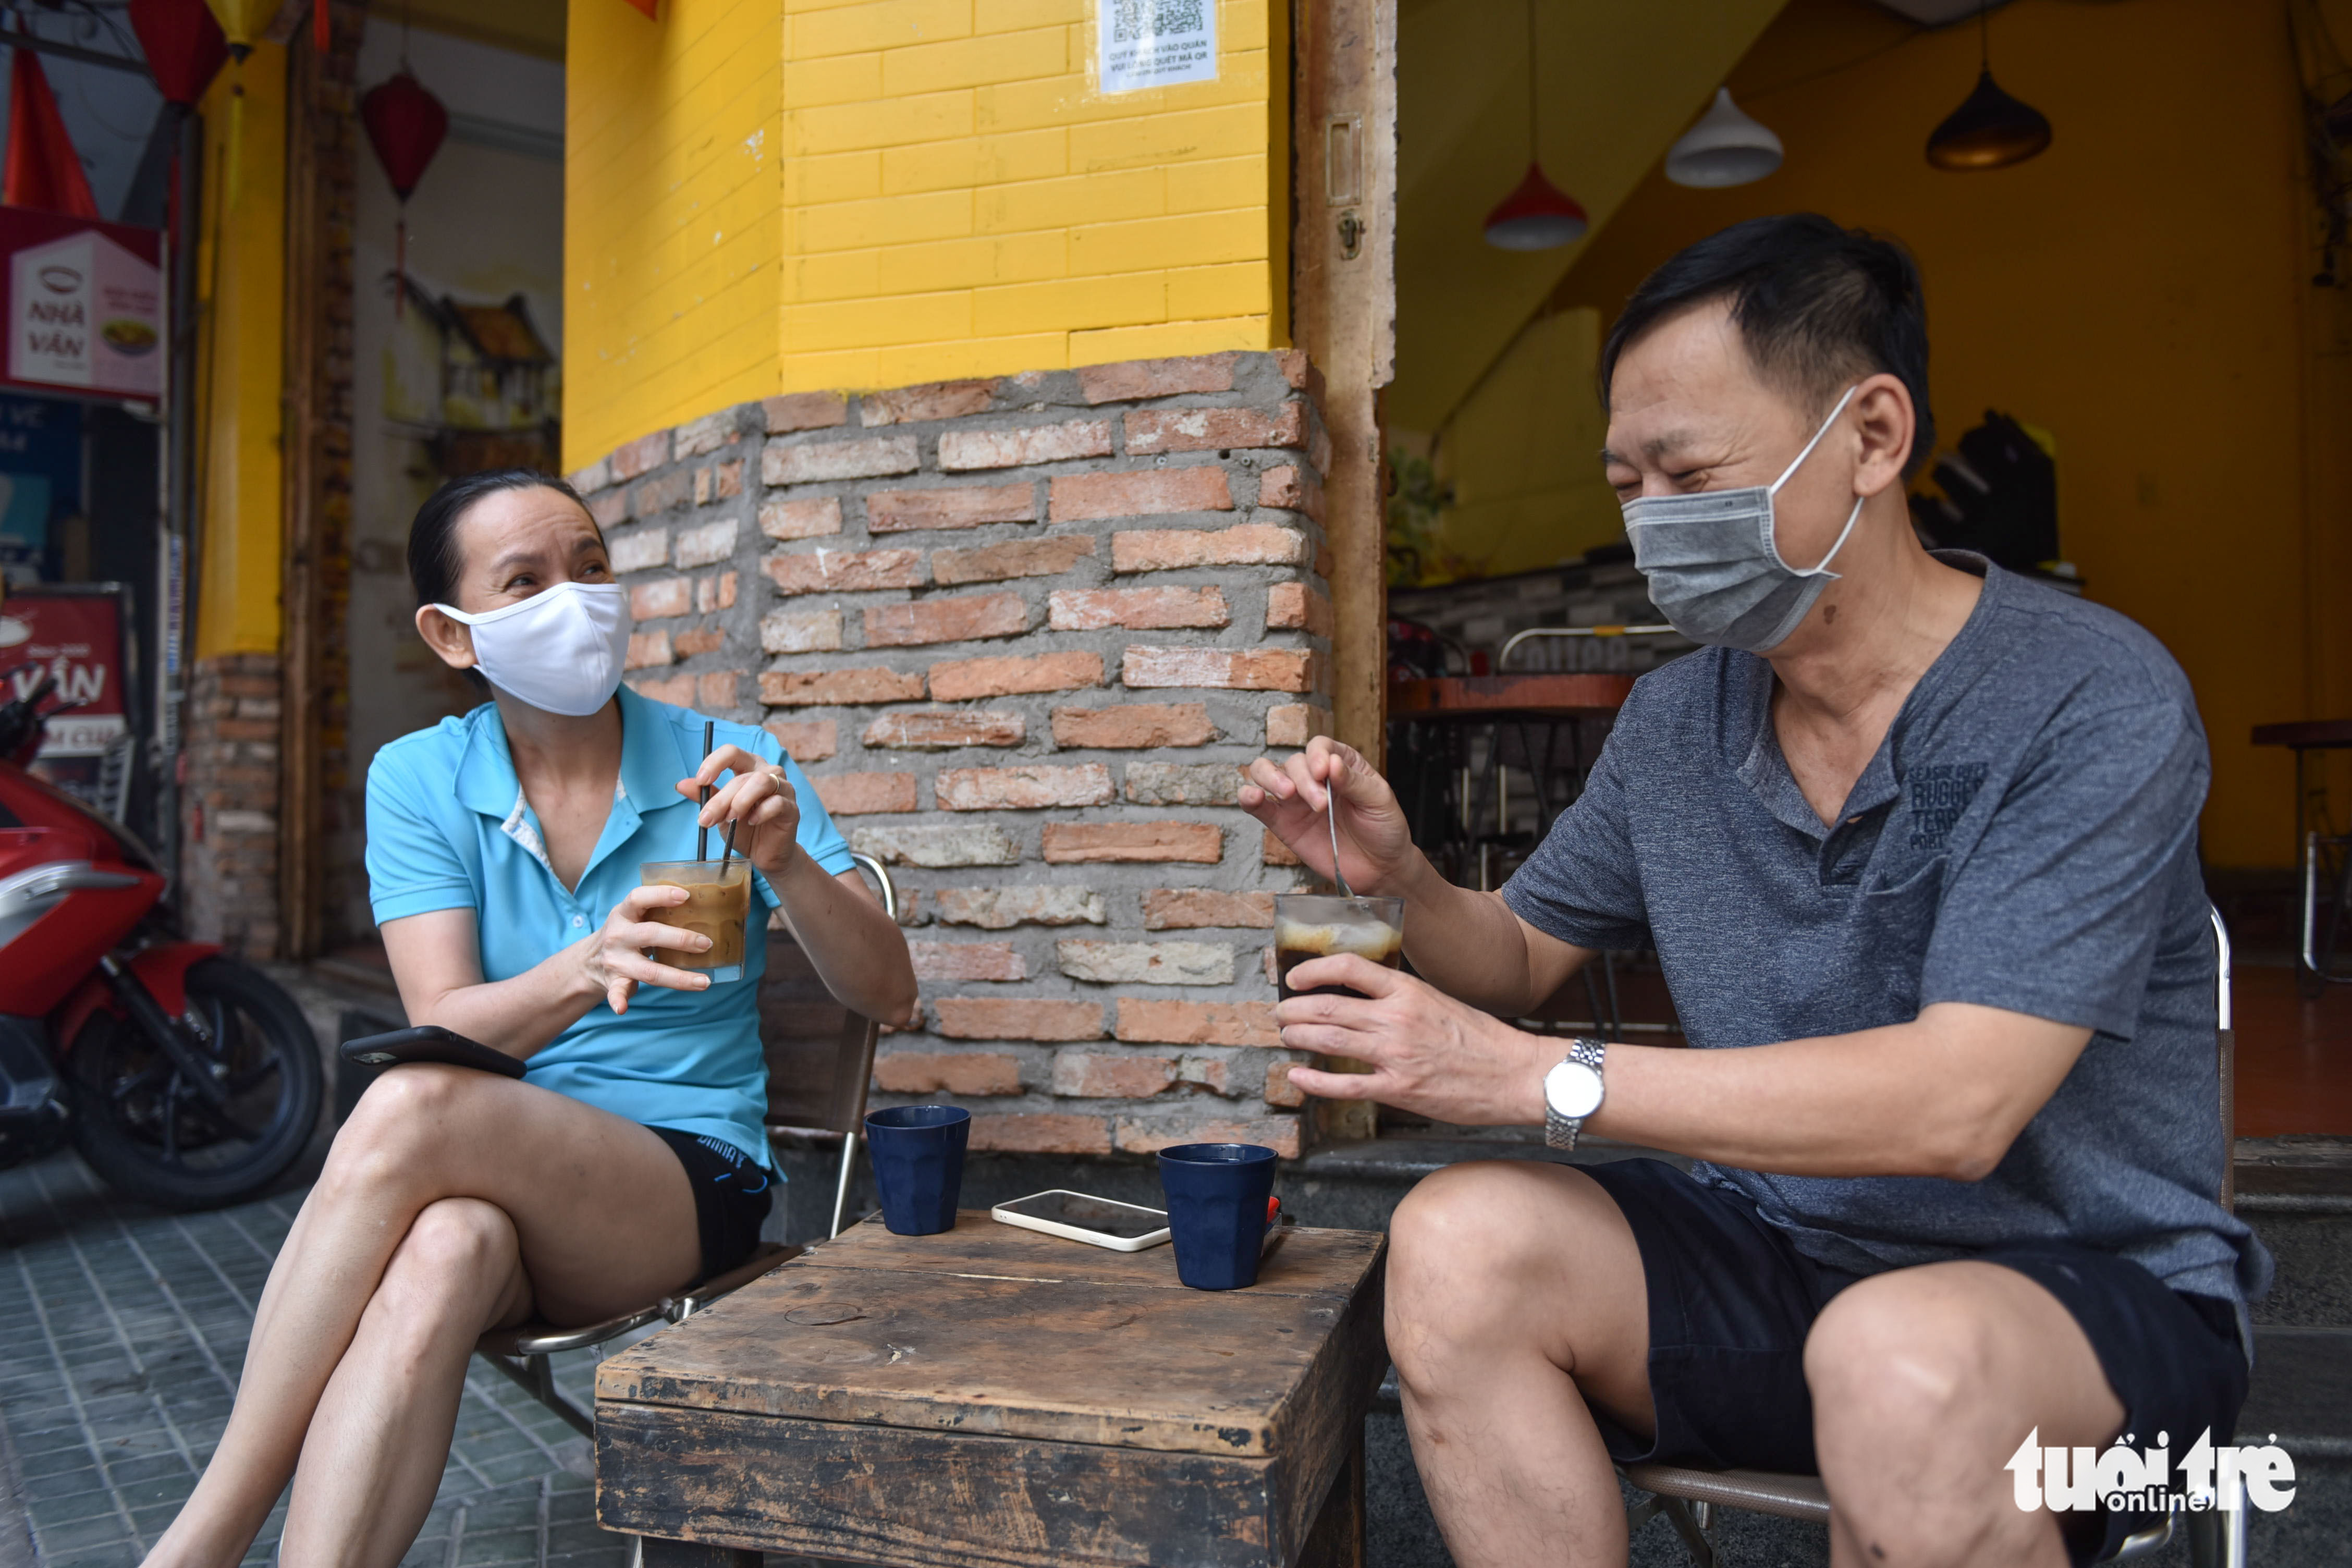 A married couple drinks coffee at a café in Phu Nhuan District, Ho Chi Minh City, October 28, 2021. Photo: Ngoc Phuong / Tuoi Tre